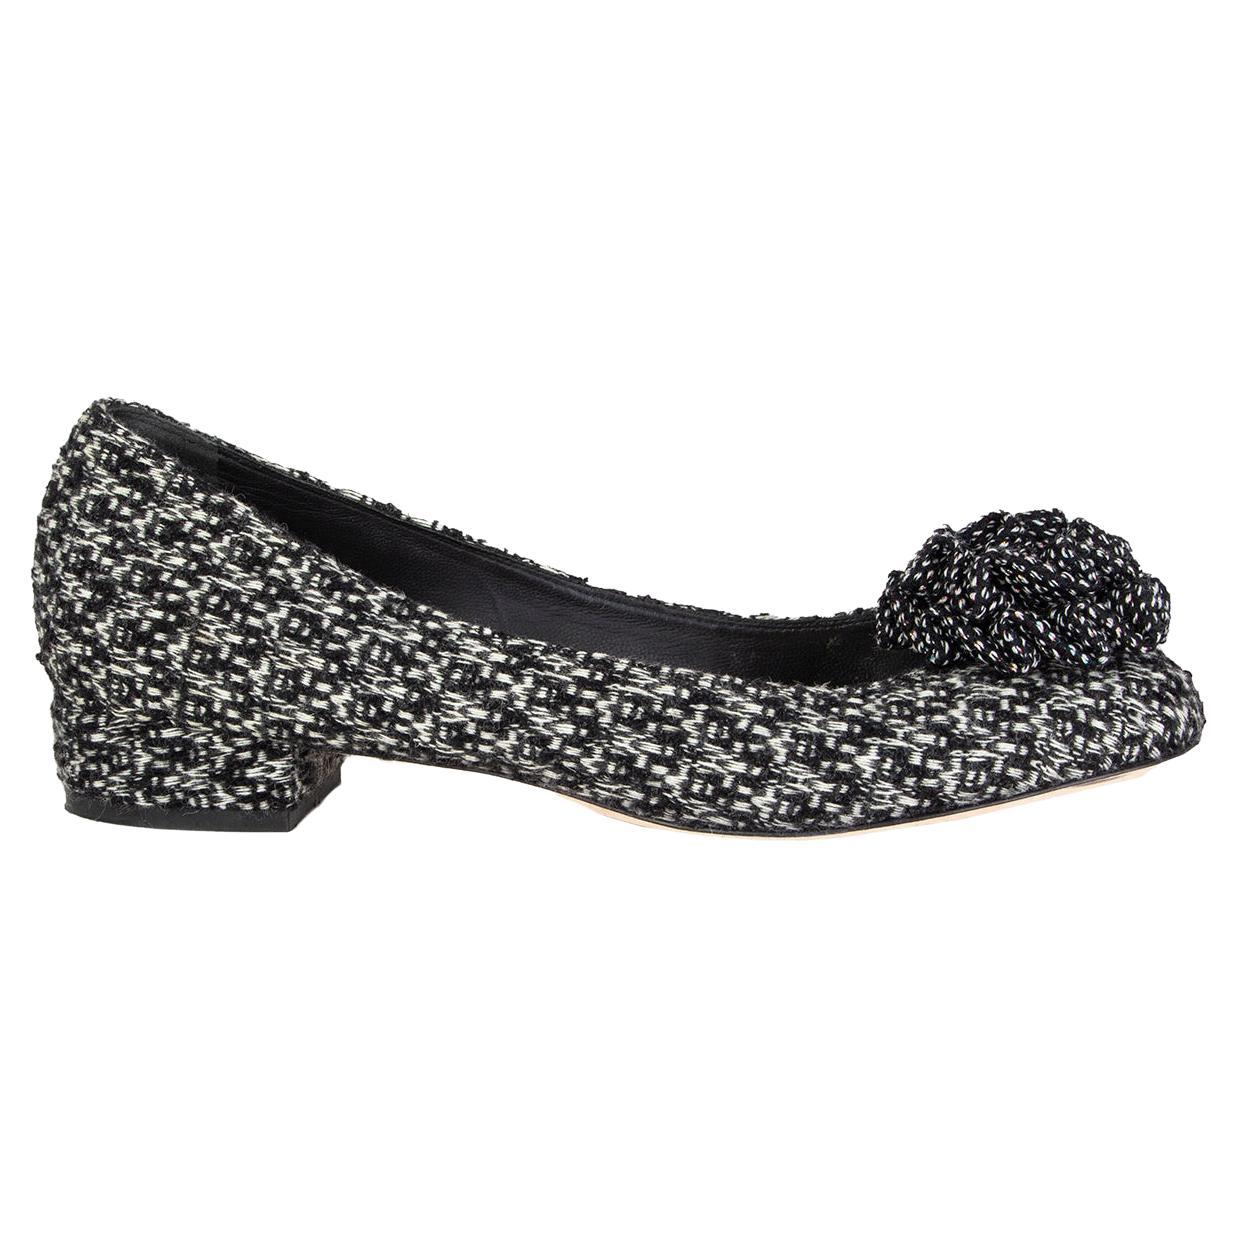 CHANEL black & white BOUCLE TWEED BLOCK HEEL Flats Shoes 40 For Sale